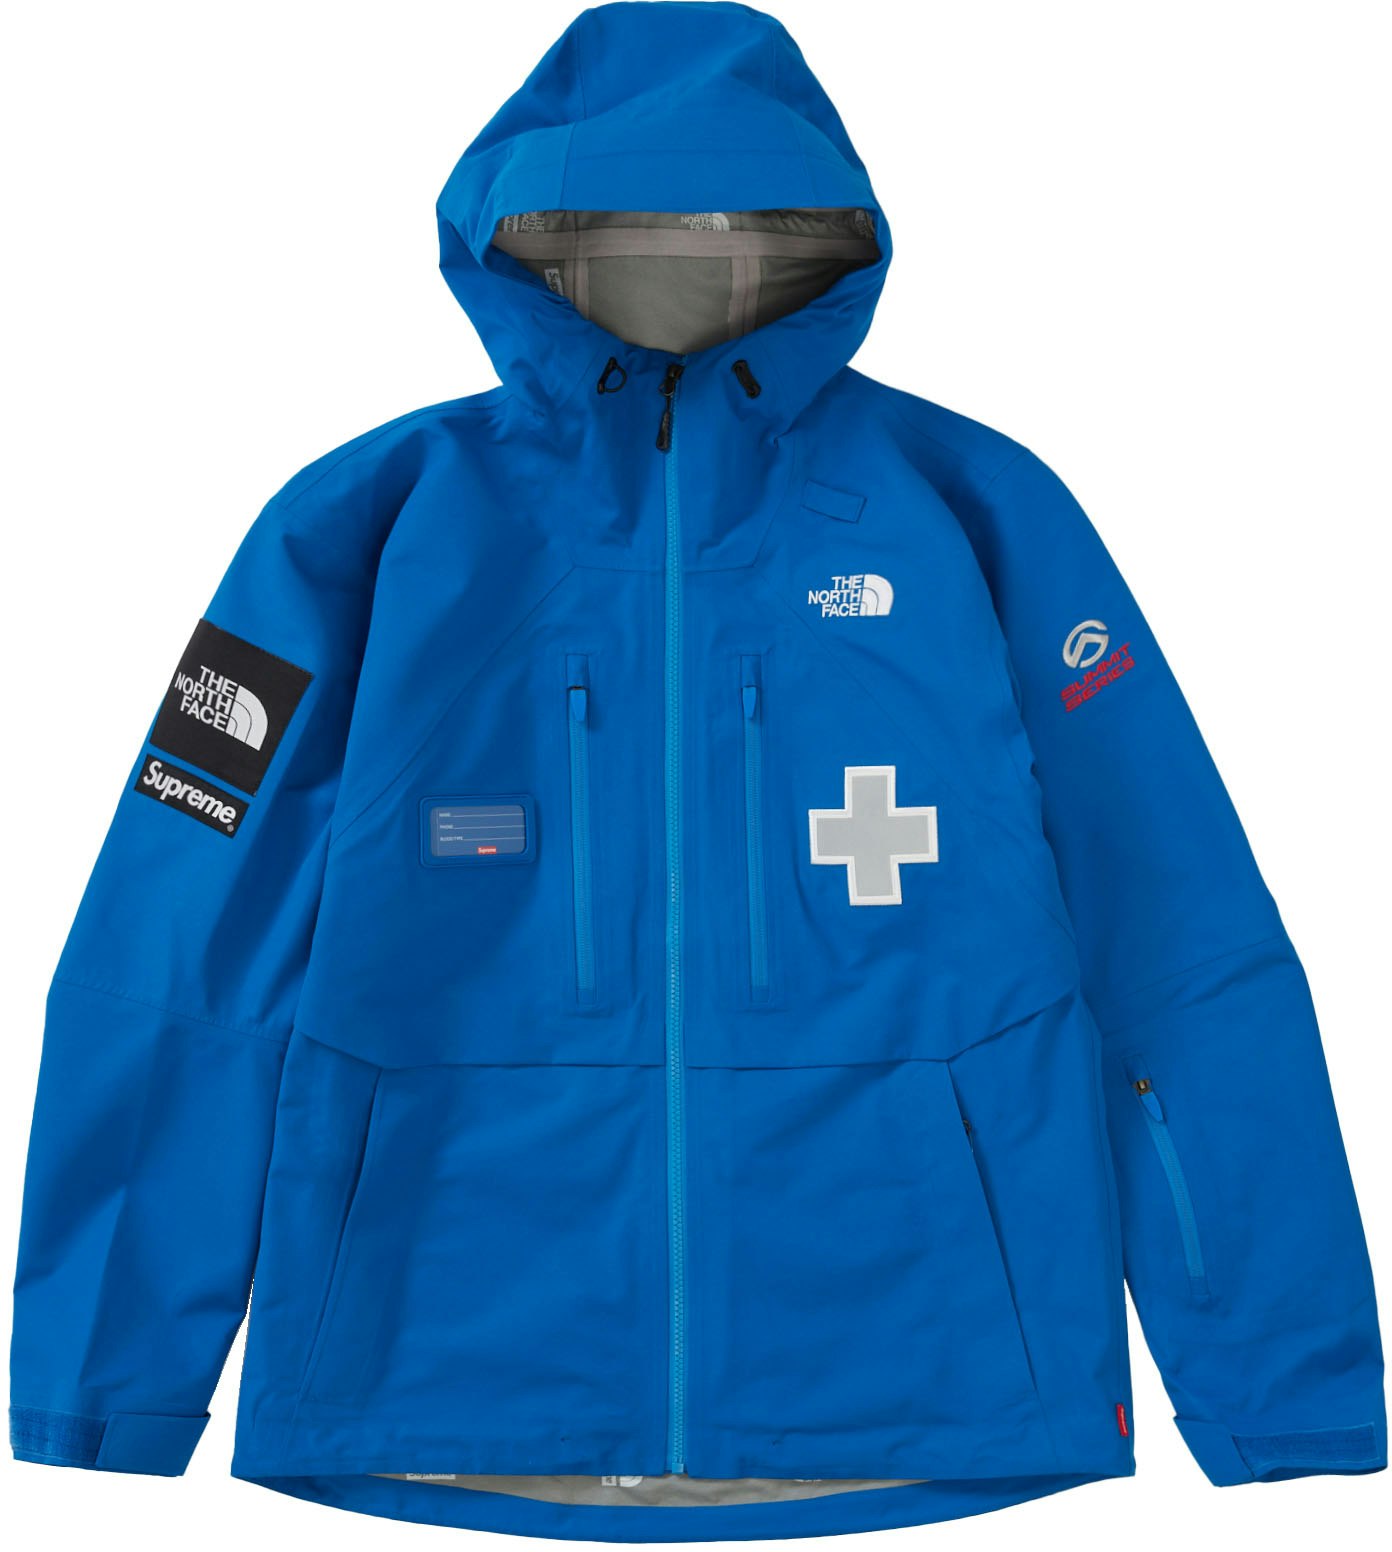 Supreme x The North Face Summit Series Rescue Mountain Pro Jacket 'Blue' -  Novelship